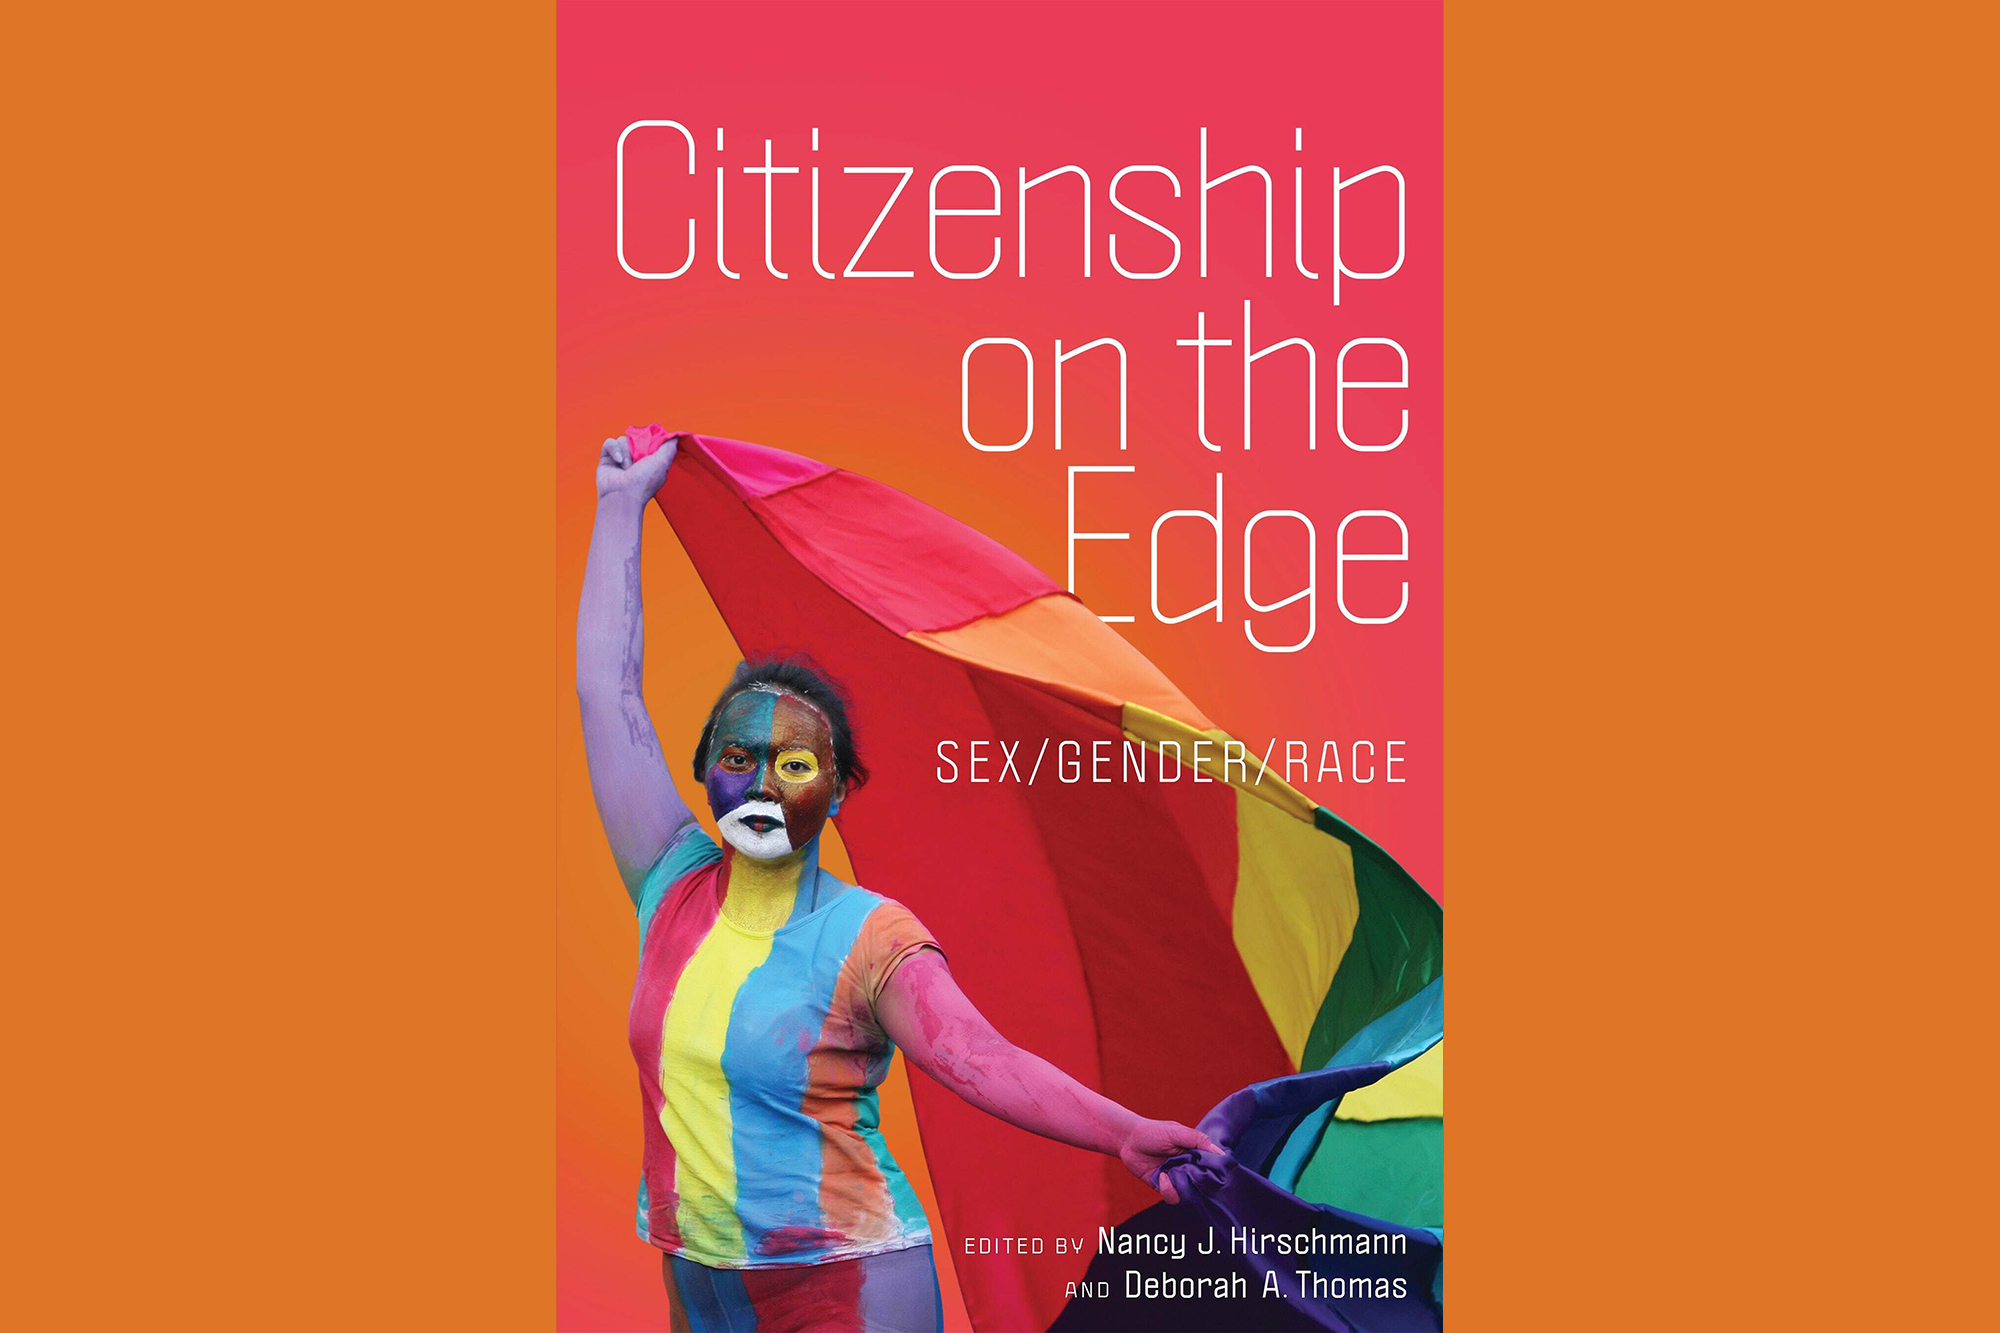 A book cover depicting a woman wearing a striped top and face and body paint. She is holding a rainbow flag. The book cover reads: Citizenship on the Edge: Sex/Gender/Race